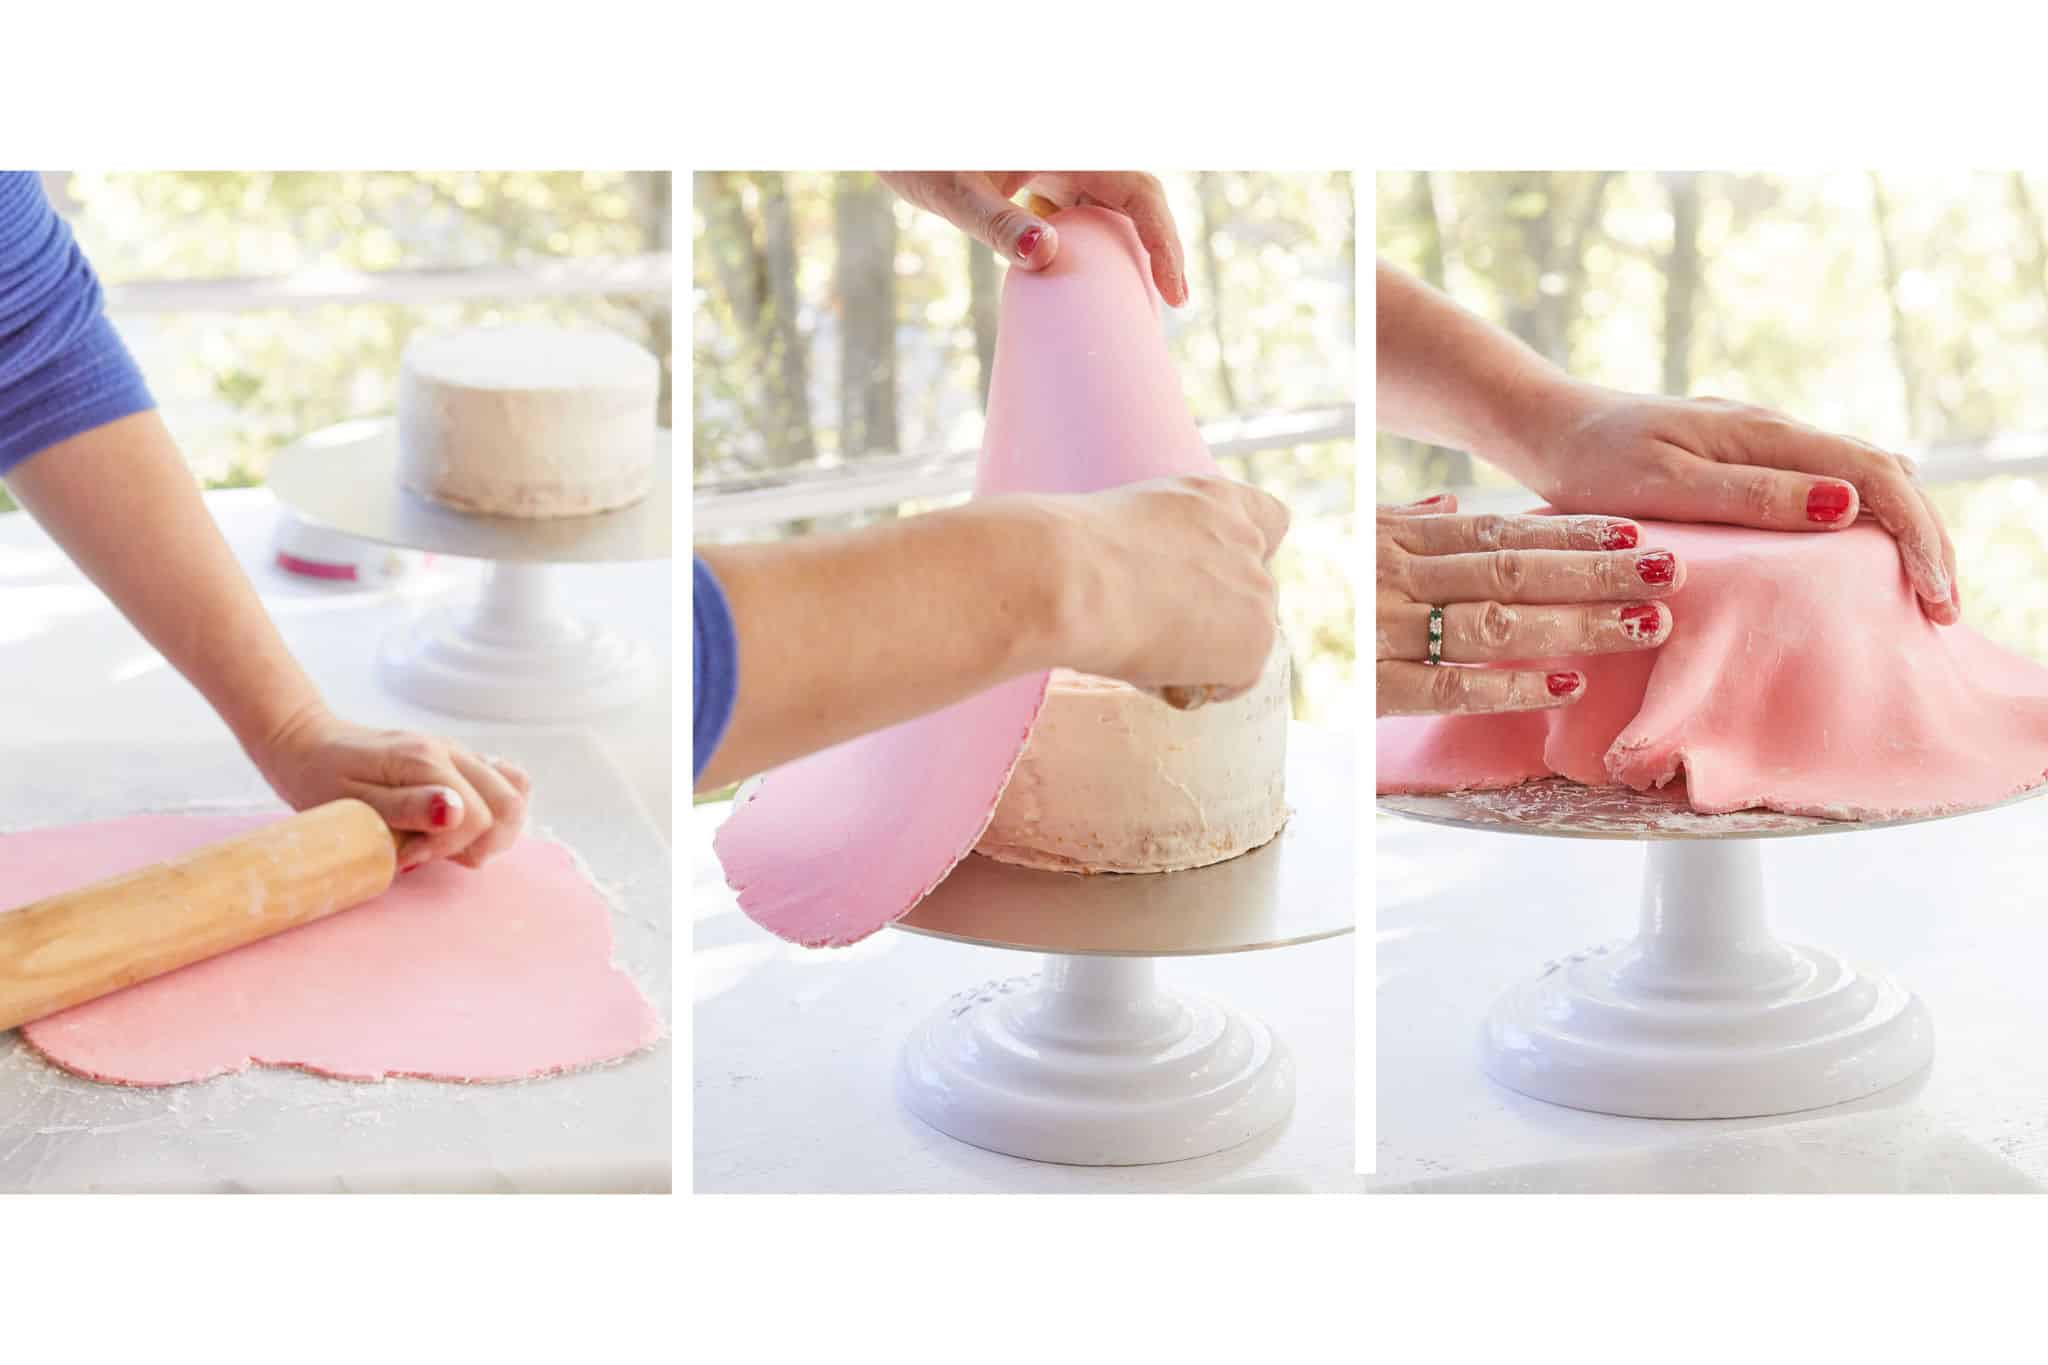 Three images of pink marshmallow fondant being prepared and put onto a cake in order.